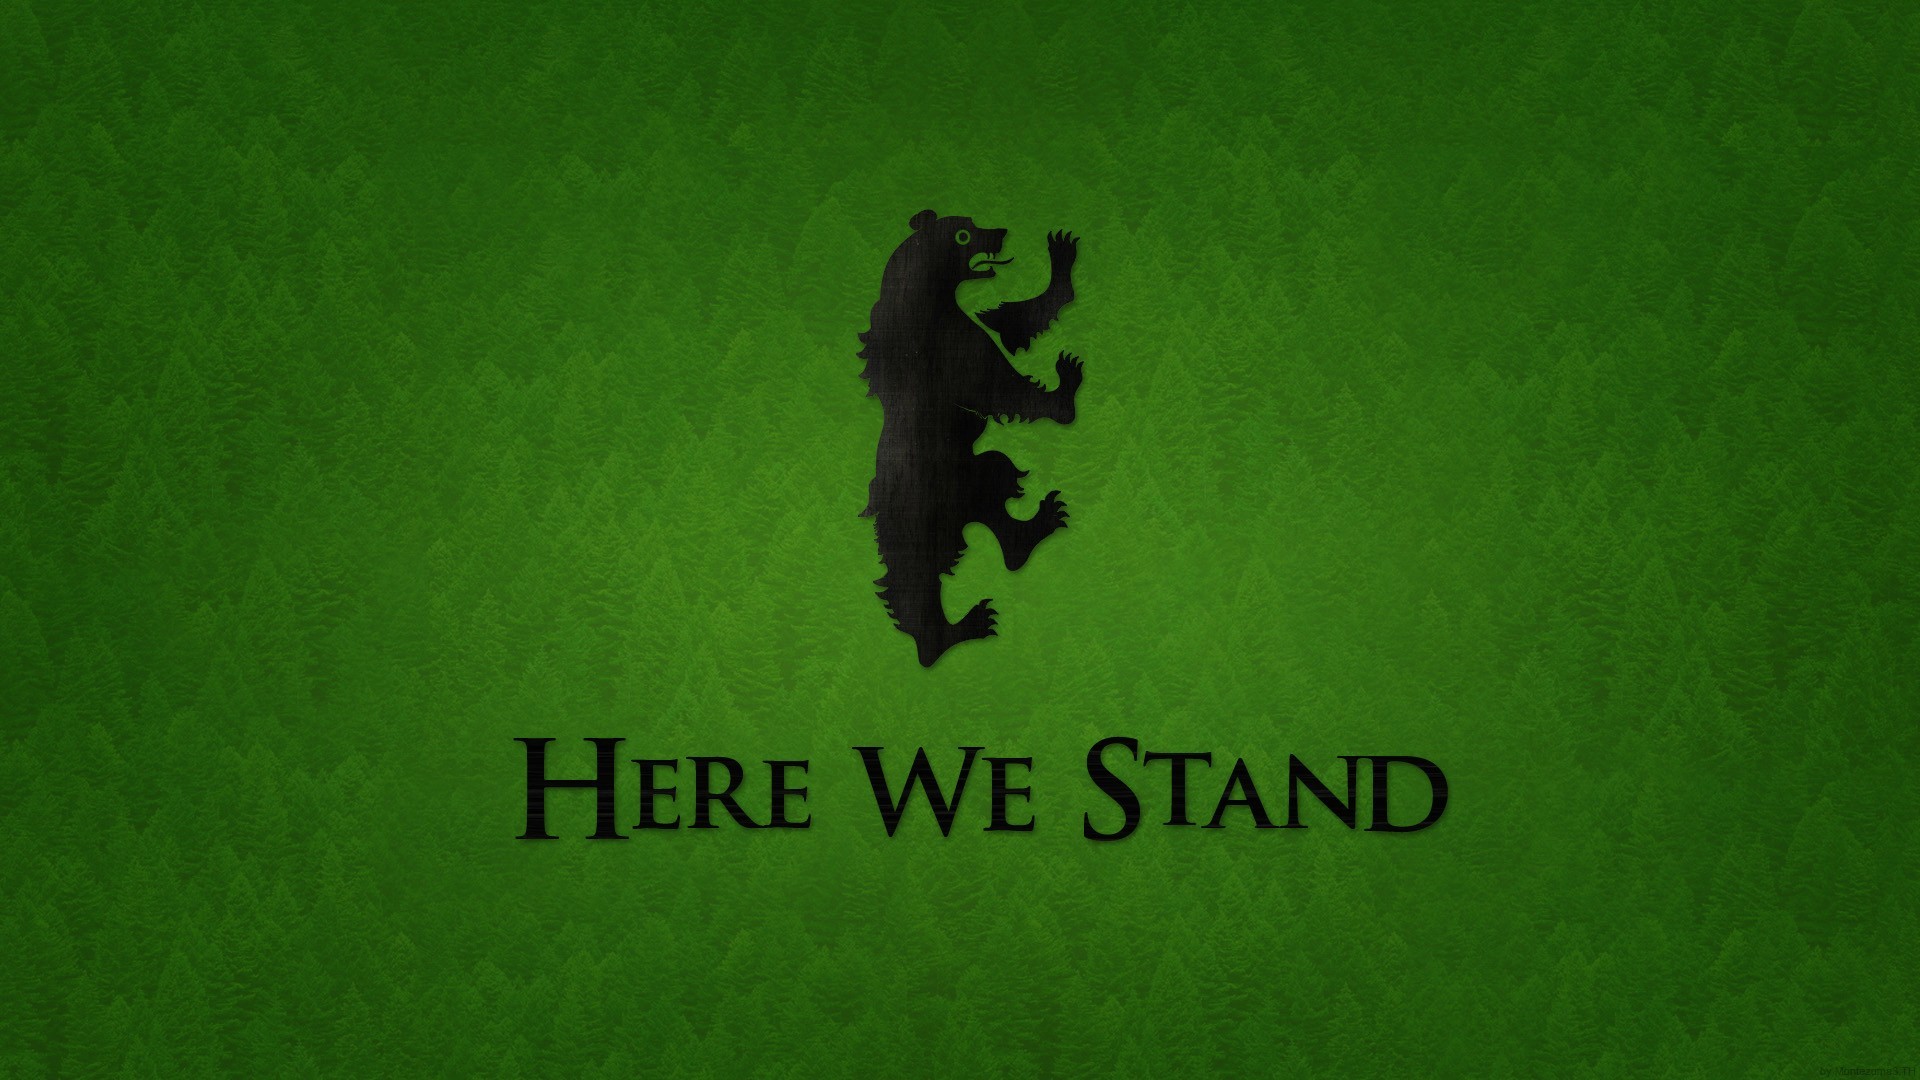 General 1920x1080 Game of Thrones A Song of Ice and Fire sigils TV series green background